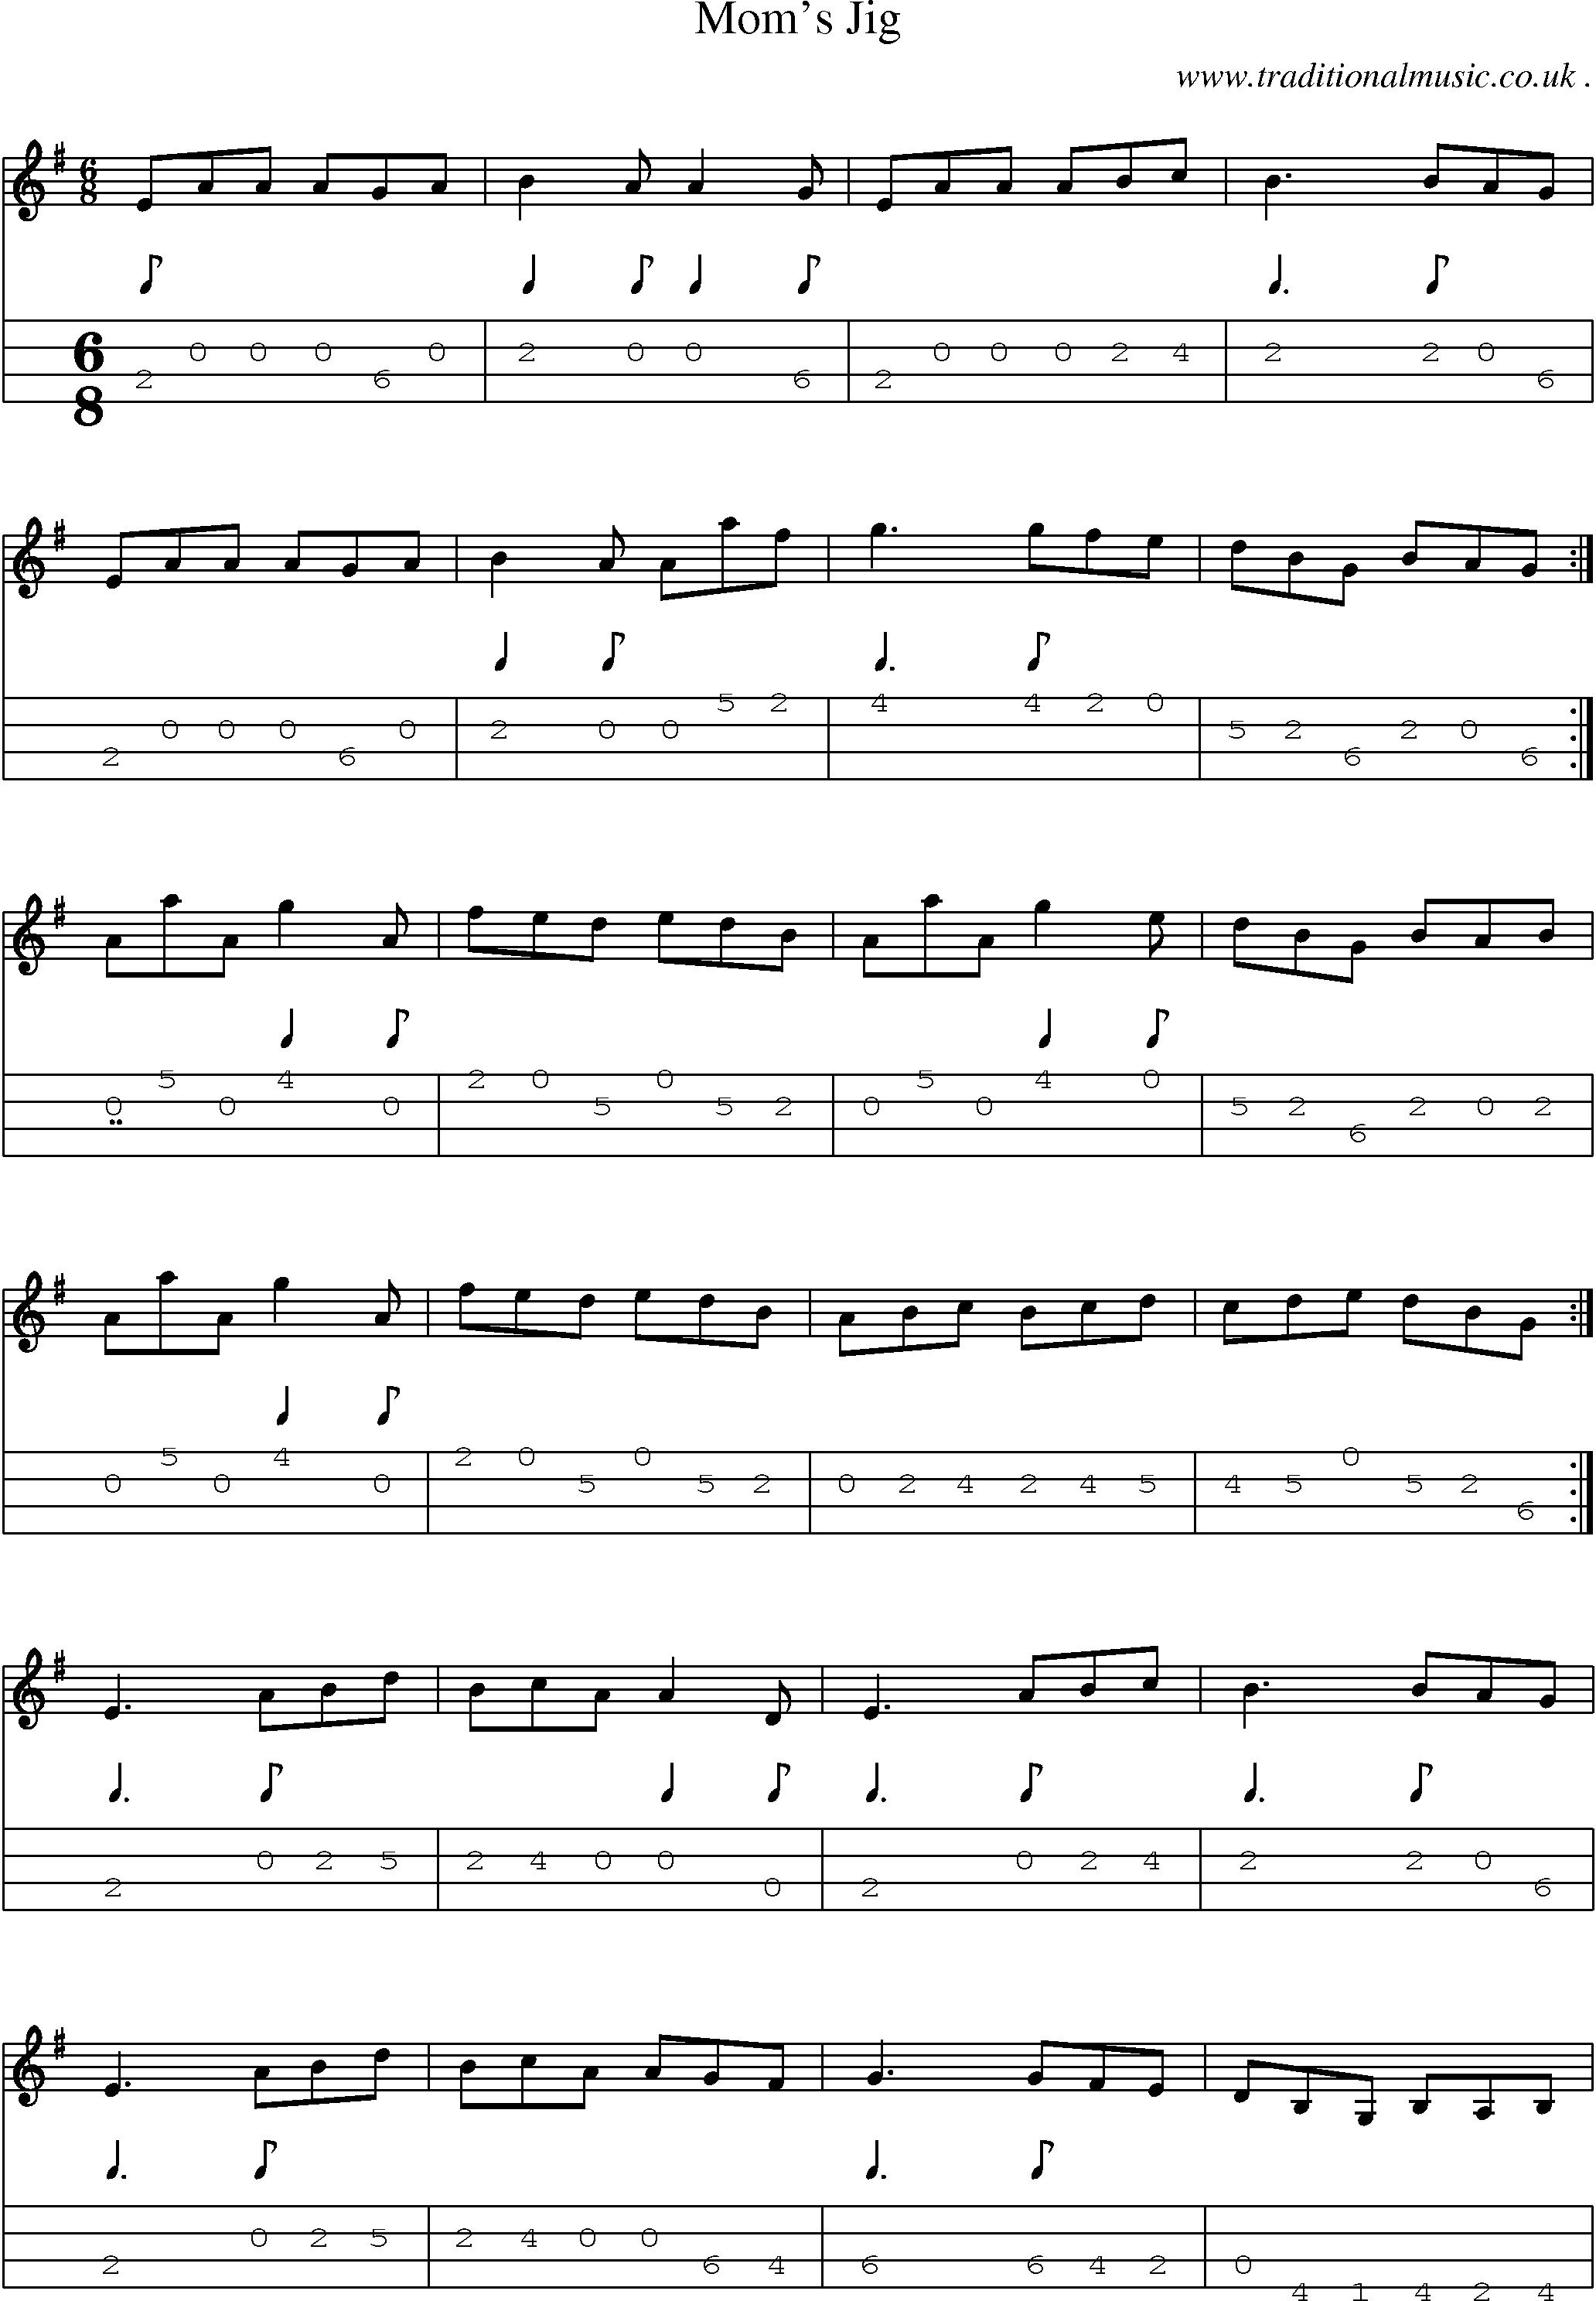 Sheet-Music and Mandolin Tabs for Moms Jig